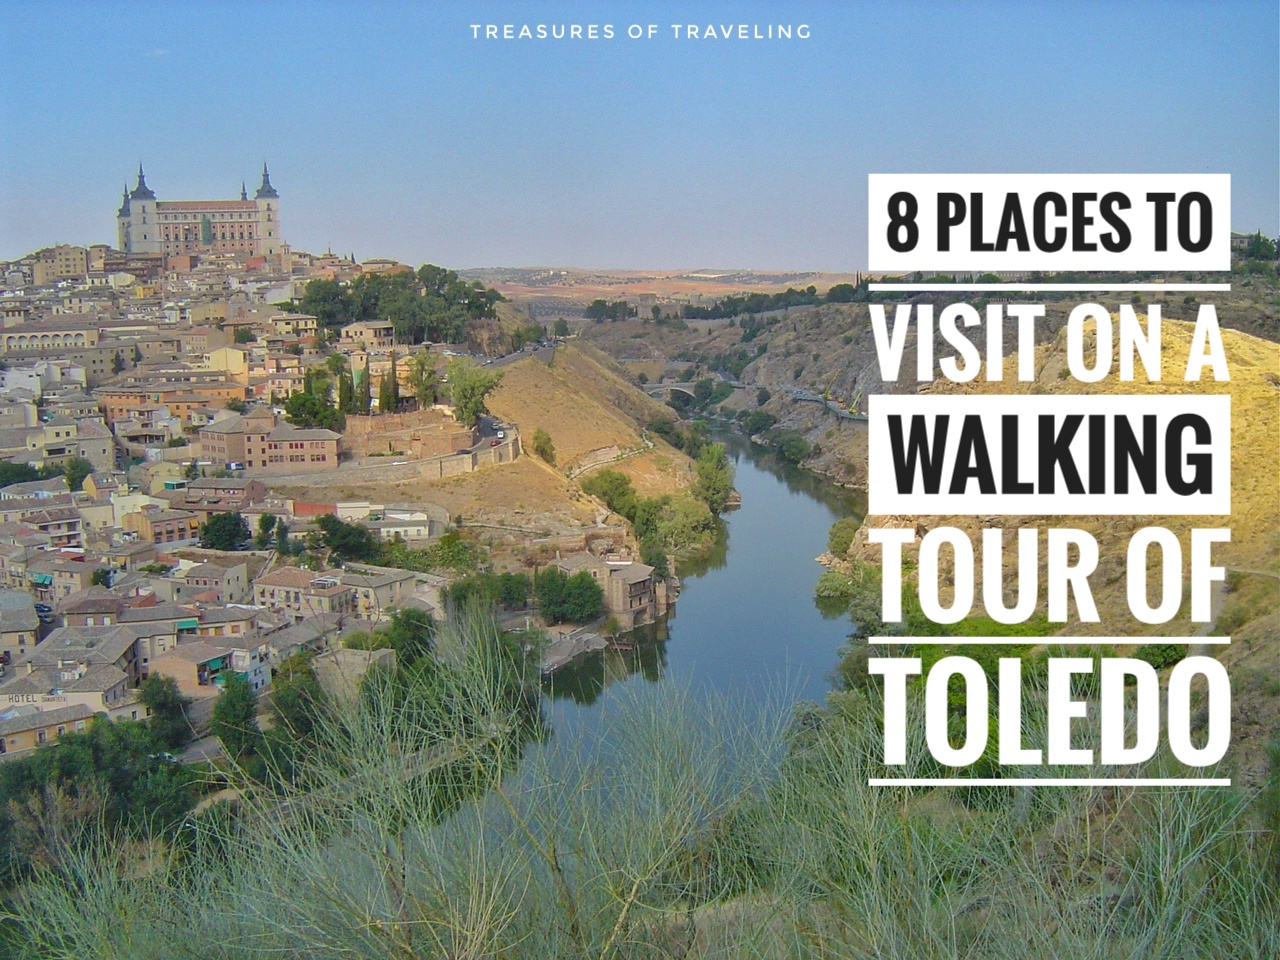 Toledo is a wonderful Spanish city to visit full of culture, history and treasures of traveling! From the Puente de San Martín to the Alcázar de Toledo; everything in Toledo is within walking distance. Here are 8 places to visit on a walking tour of Toledo!